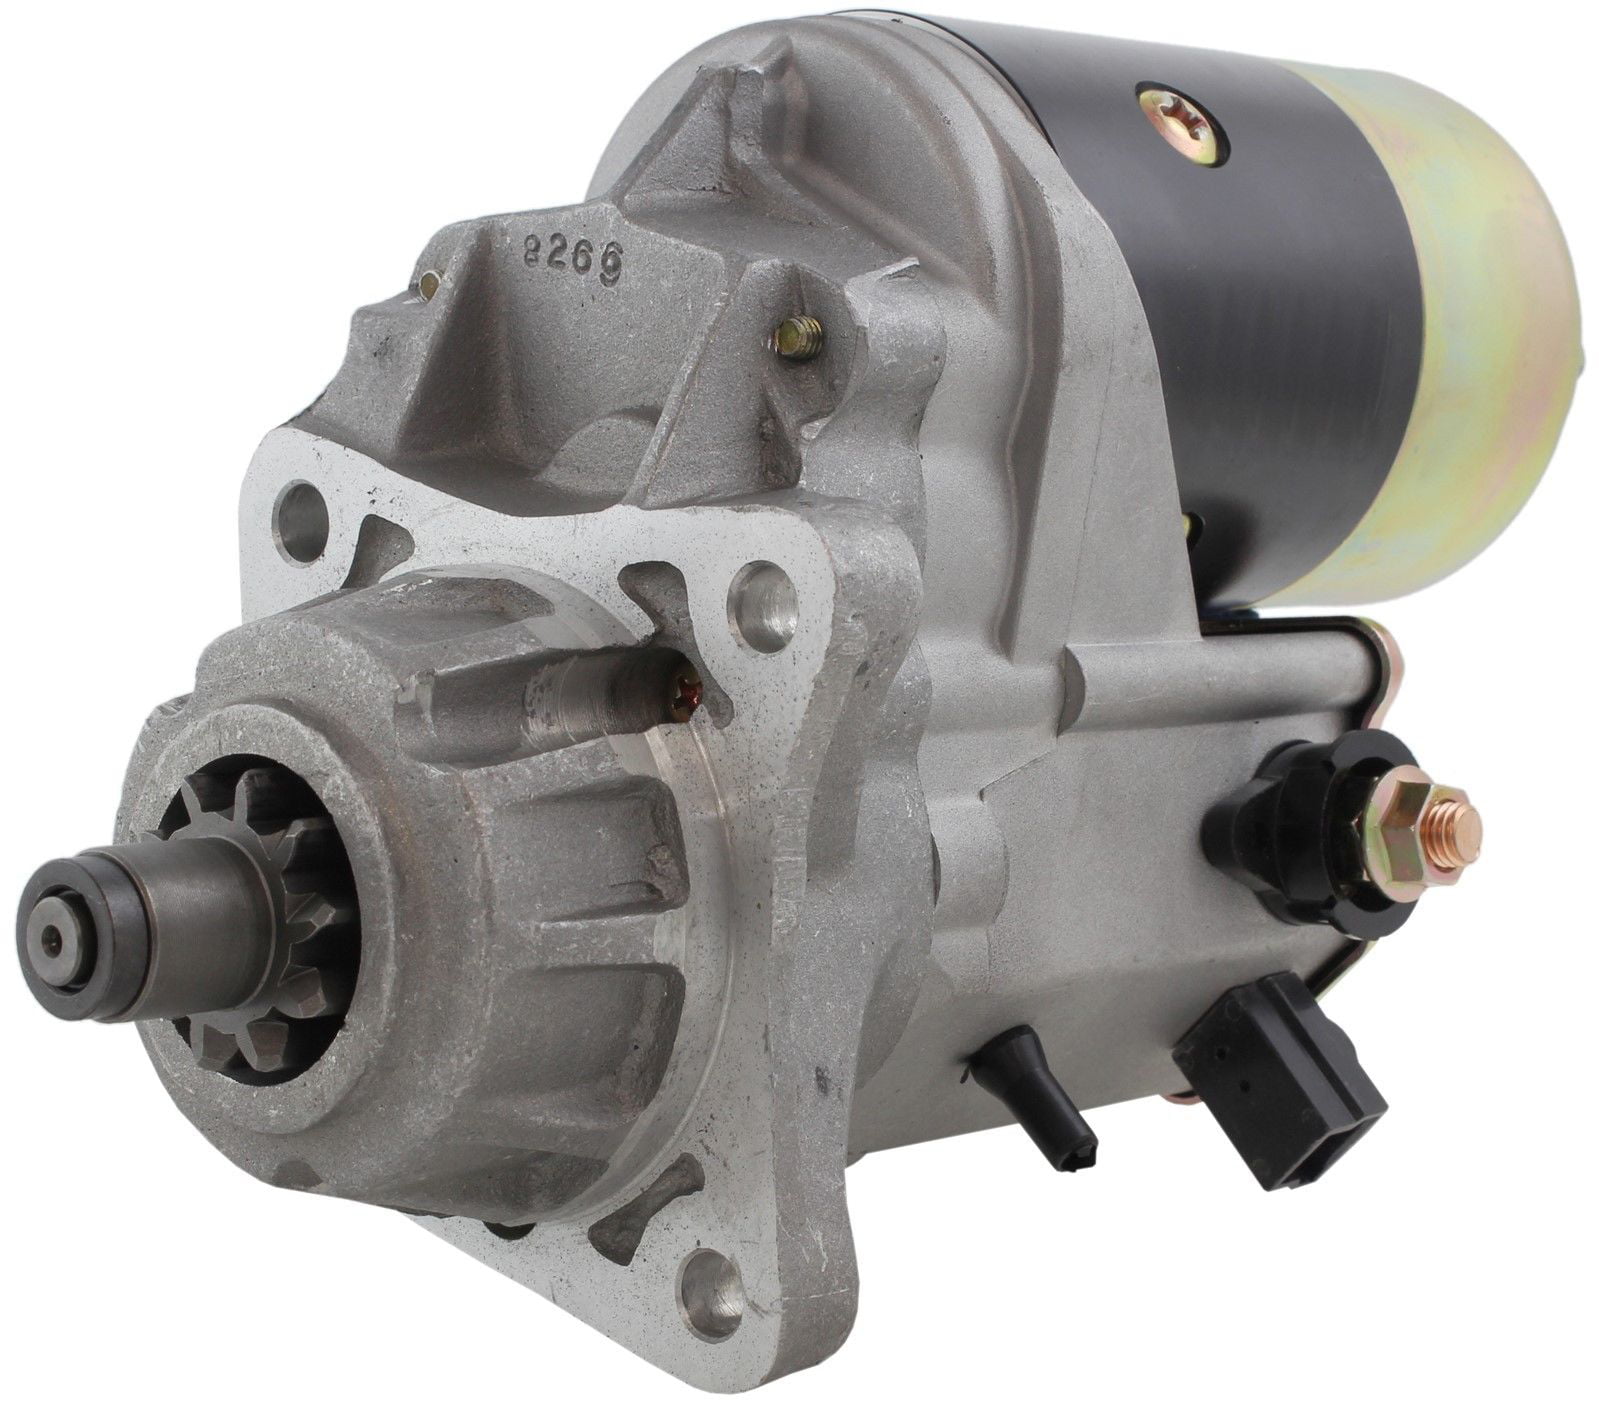 Details about   New Gear Reduction Starter 10 Tooth For Caterpillar 91-01-4054 1998337 1107511 